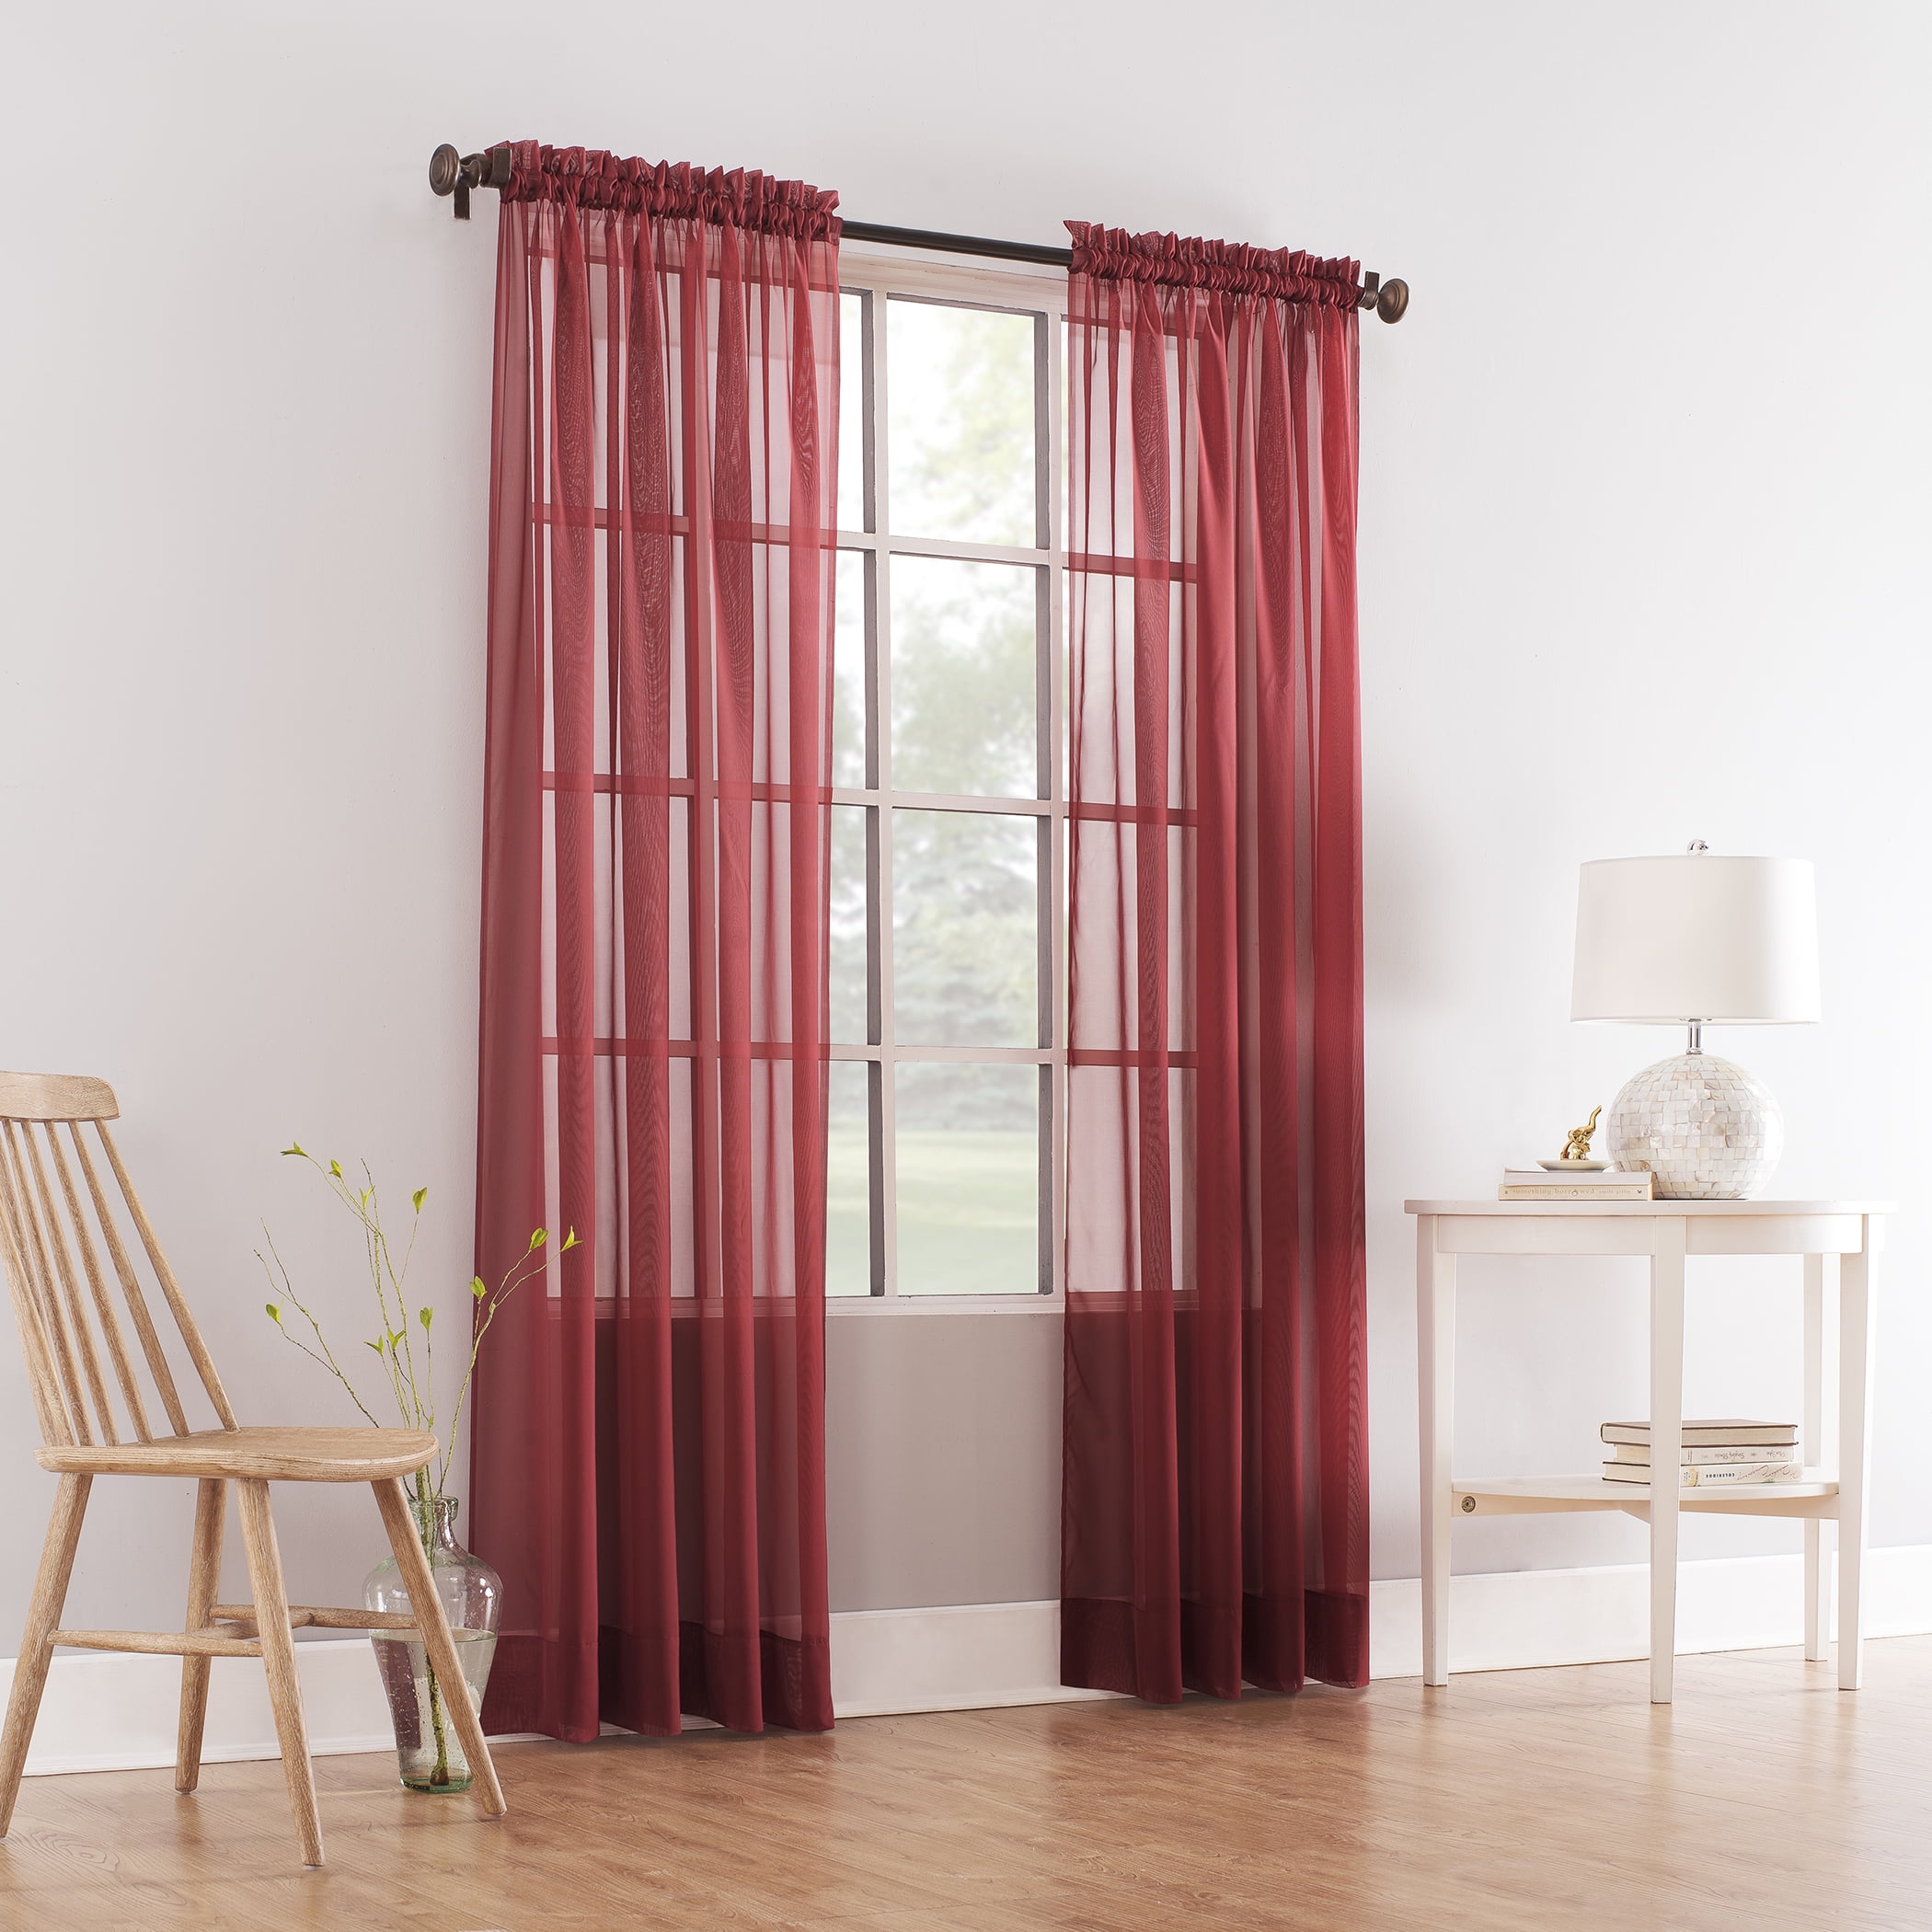 Sheer Curtain Panels|Wine Red Sheer Curtains for Living Room, Bedroom, Hand Block Printed Cotton Voile with Tieback | 18 x 18 | Saffron Marigold